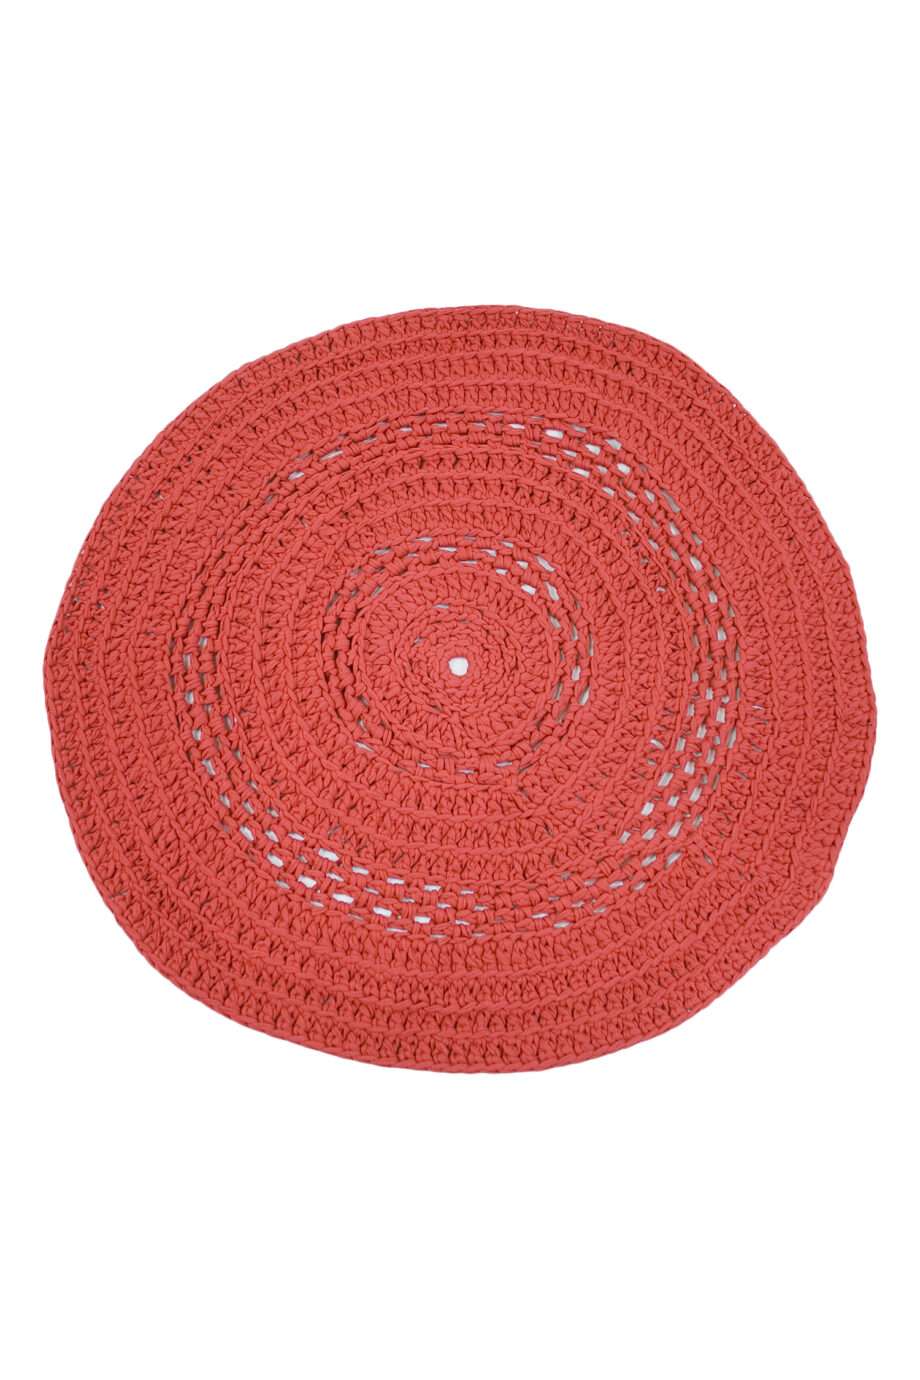 peony red coral crochet cotton rug xlarge